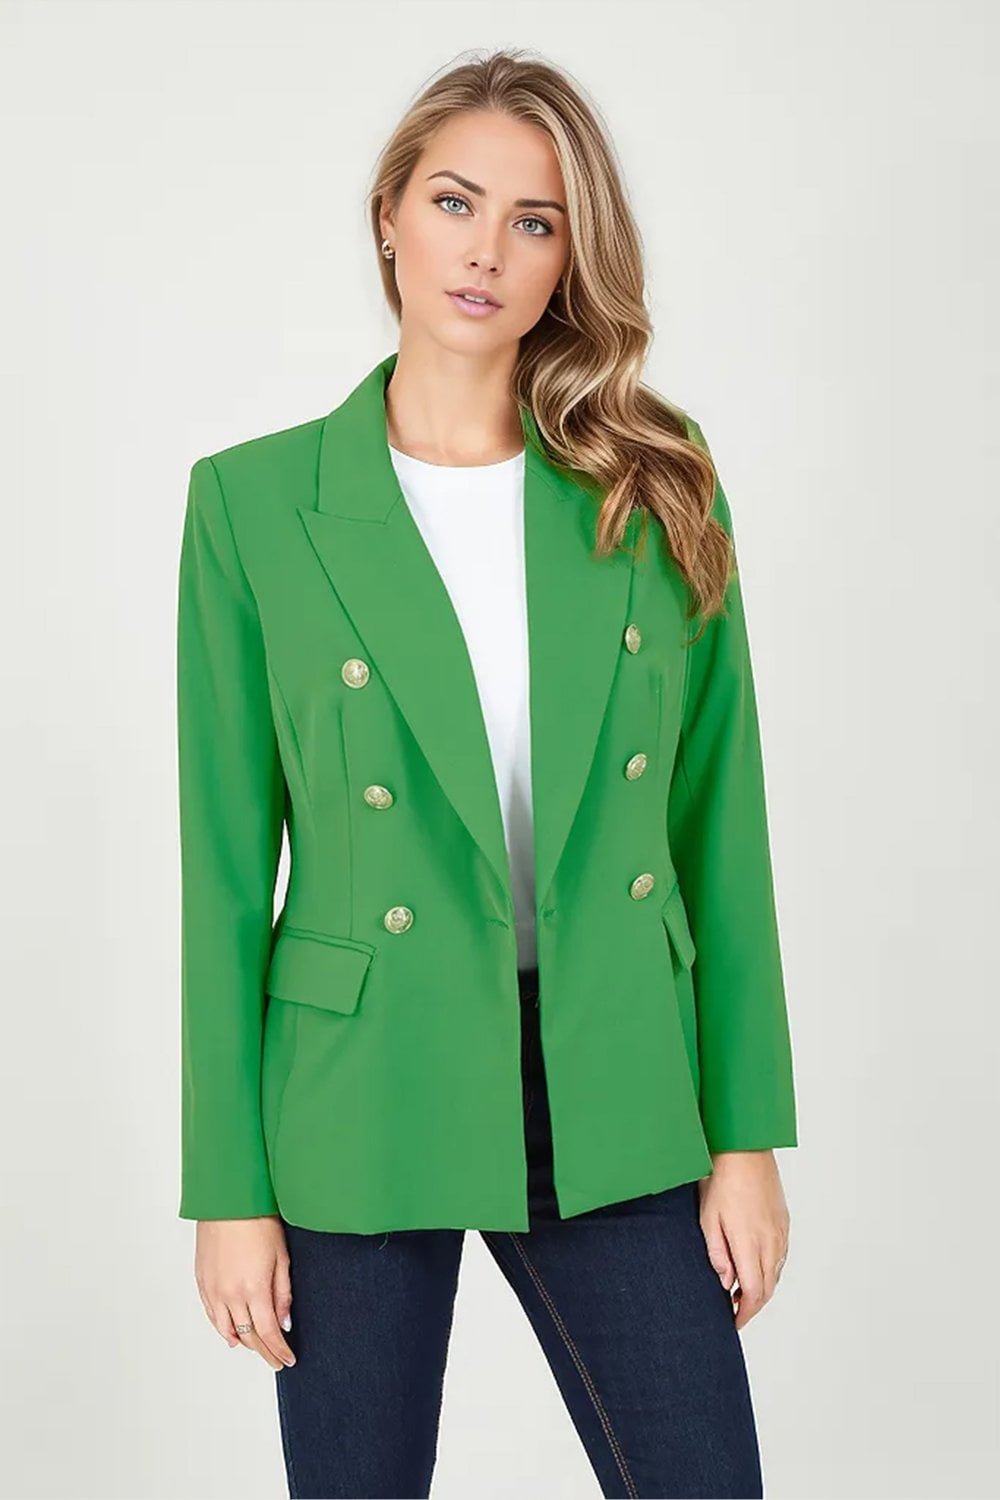 Image of Green Blazer With Contrast Stripe Lining